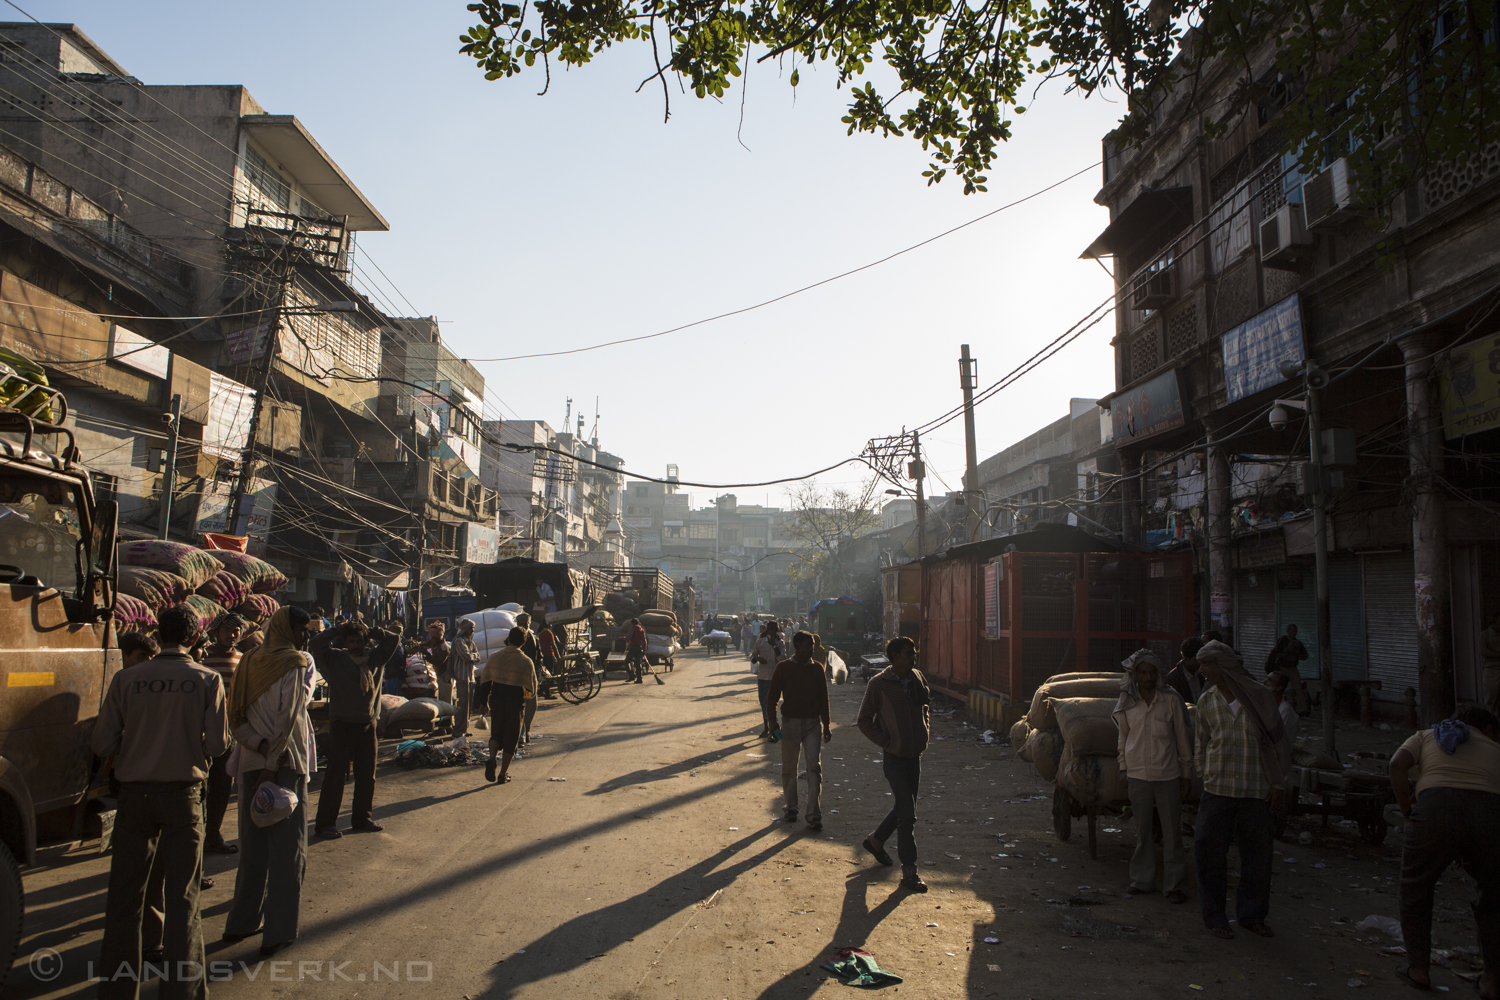 Early morning preparations. Old Delhi, India. 

(Canon EOS 5D Mark III / Canon EF 24-70mm f/2.8 L USM)